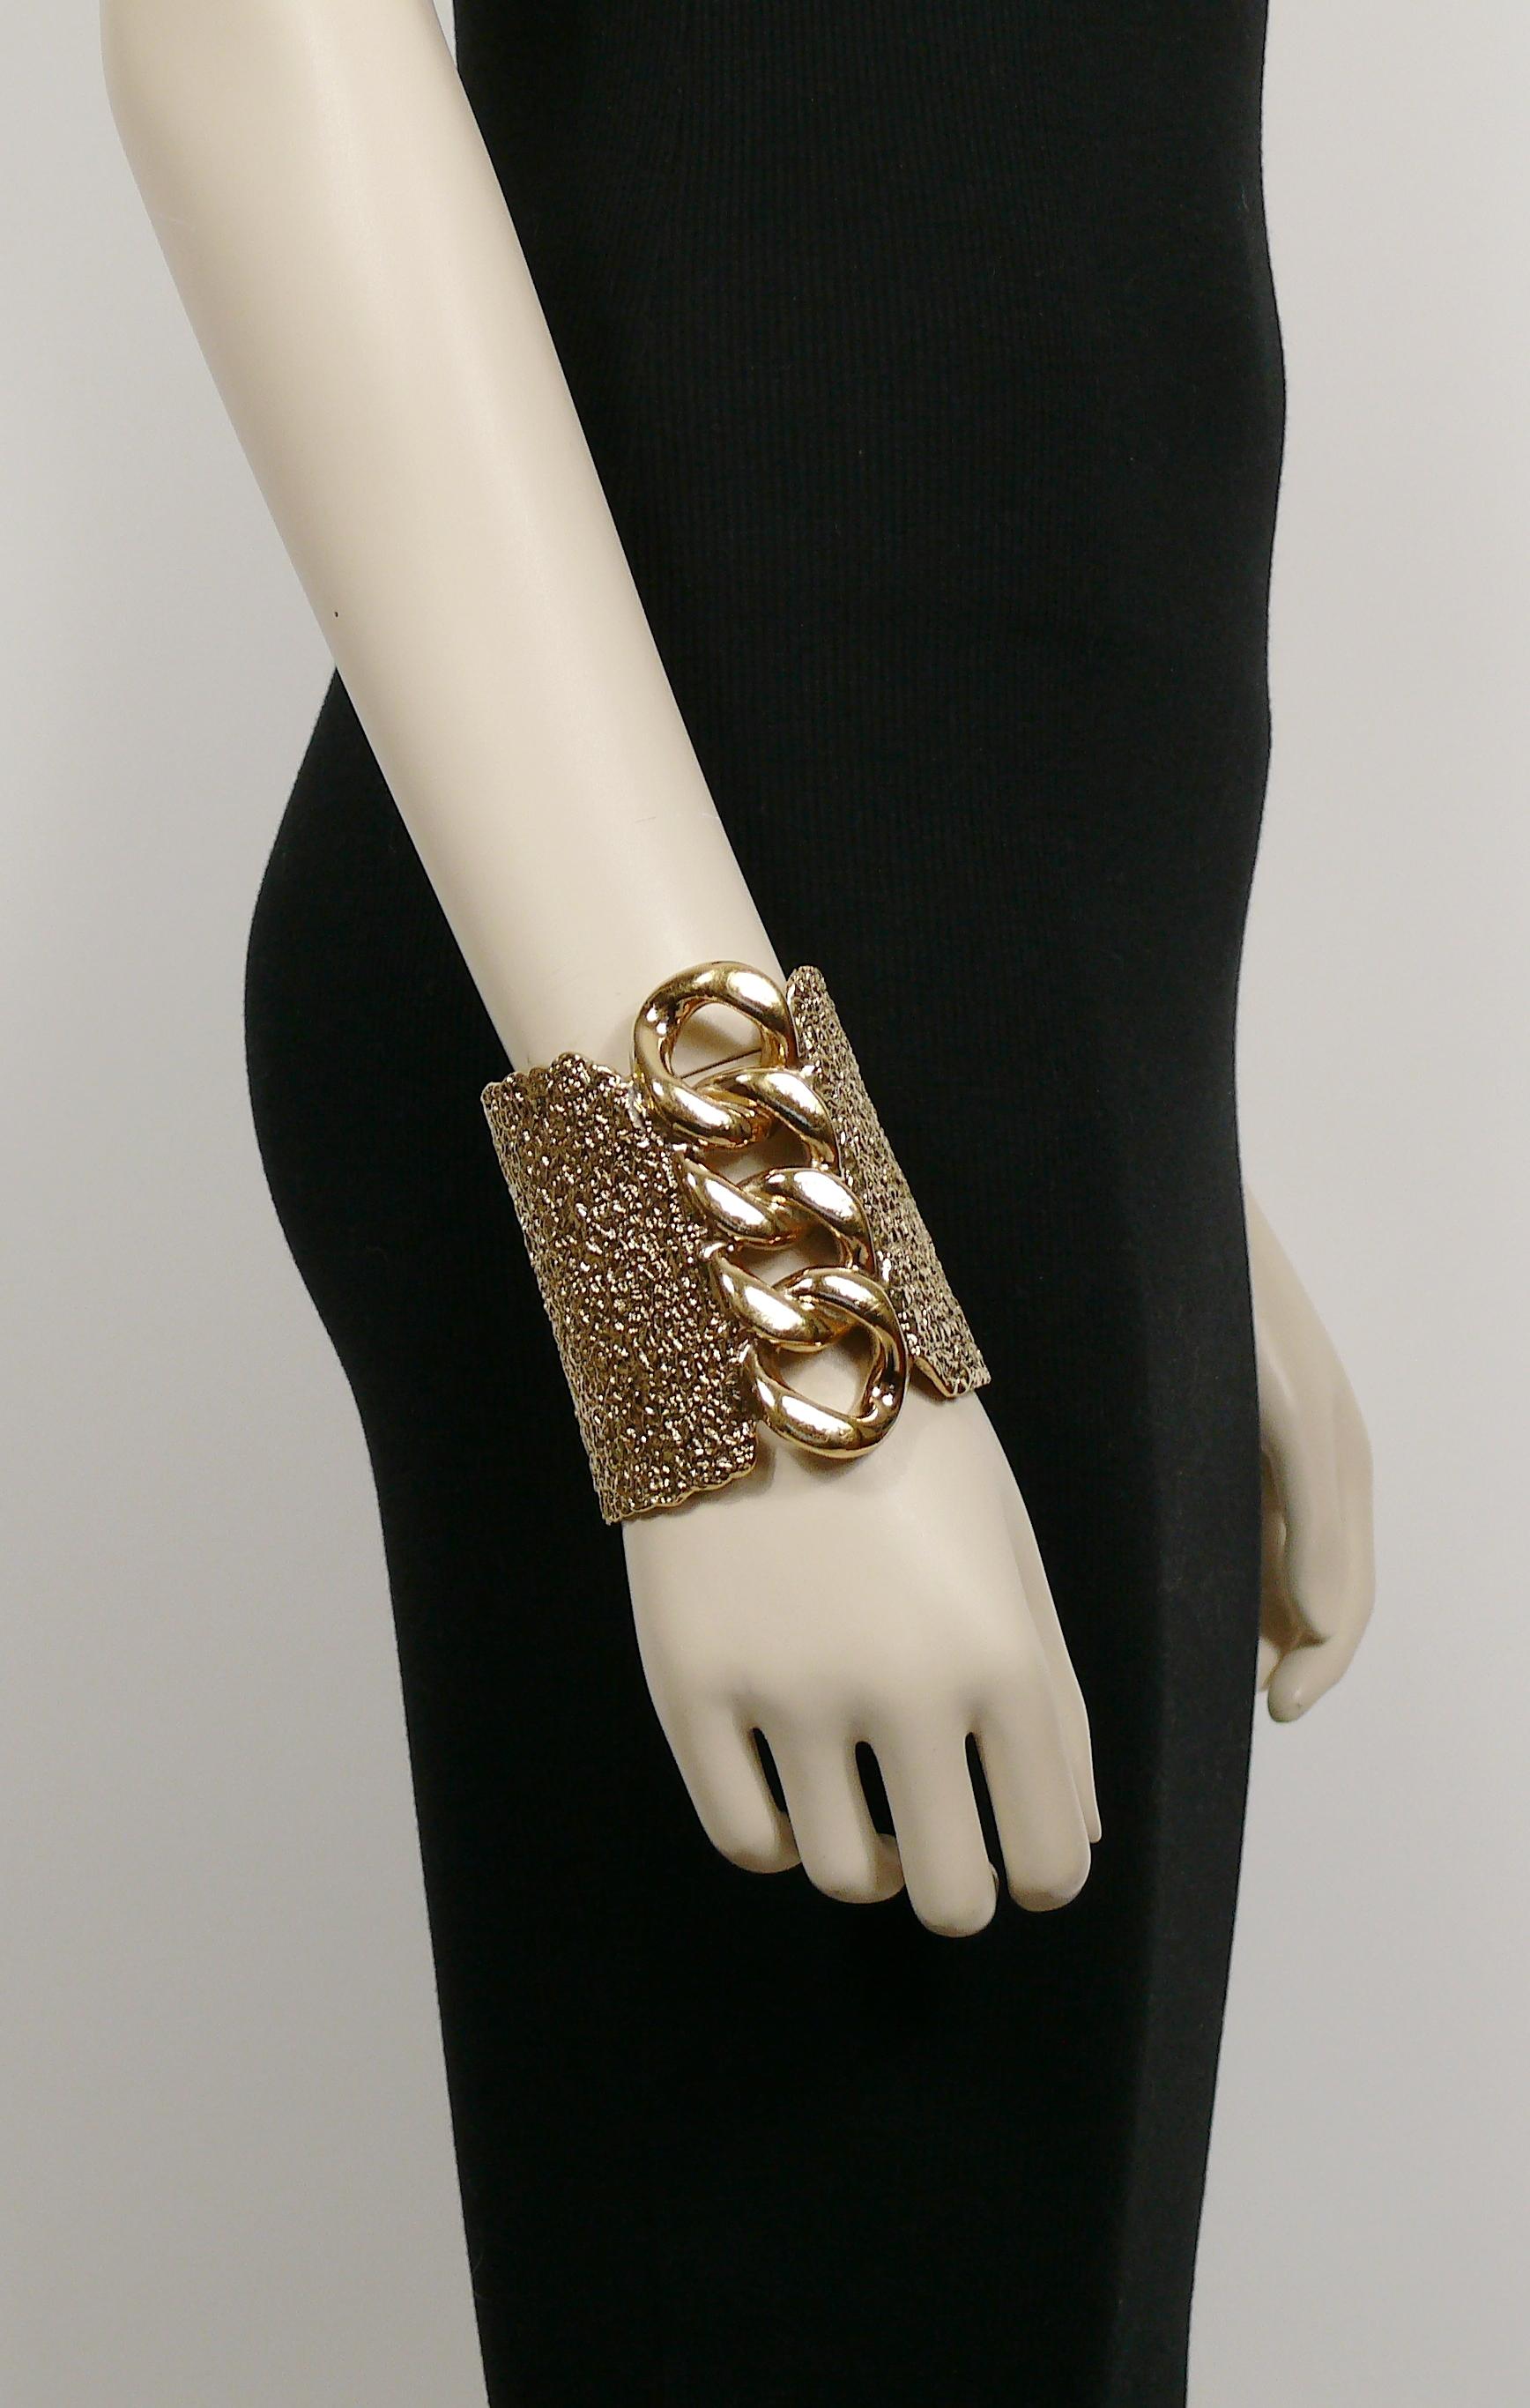 YVES SAINT LAURENT massive textured gold tone cuff bracelet featuring a large rigid chain design on the front.

Embossed YVES SAINT LAURENT.

Indicative measurements : min. inner width approx. 6 cm (2.36 inches) / max. inner width approx. 6.9 cm